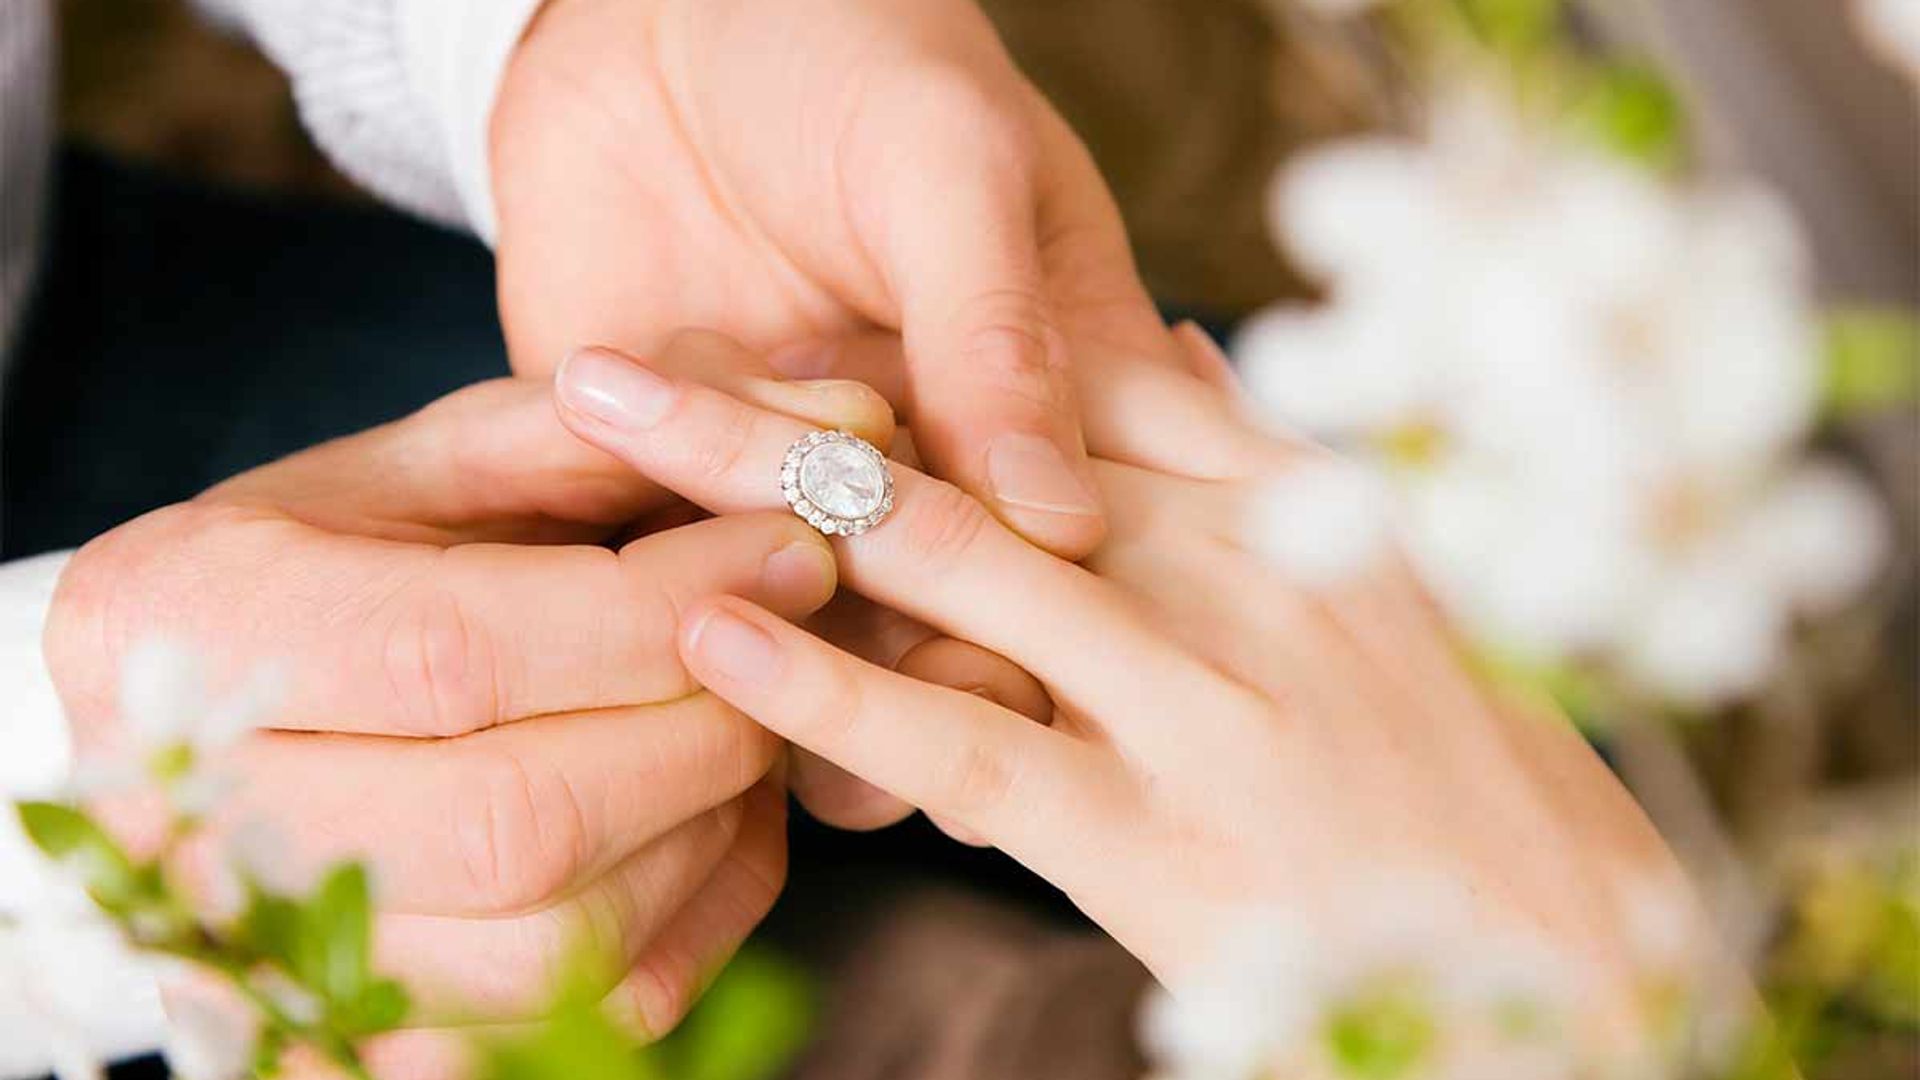 Engagement Rings- Best Tips For Finding The Right One